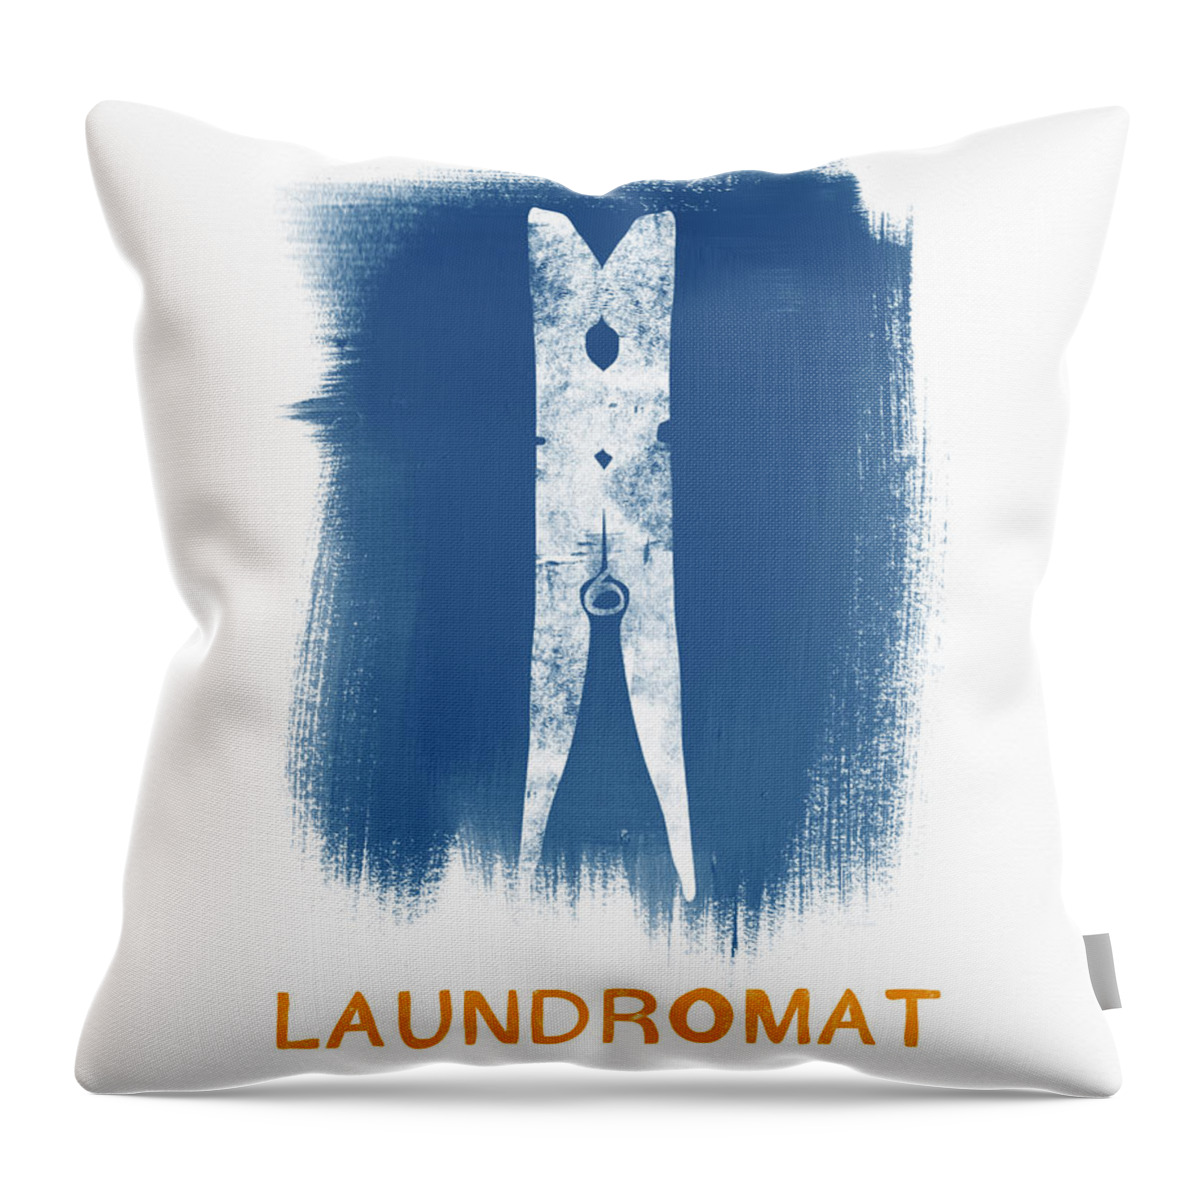 Laundry Throw Pillow featuring the painting Laundromat- Art by Linda Woods by Linda Woods